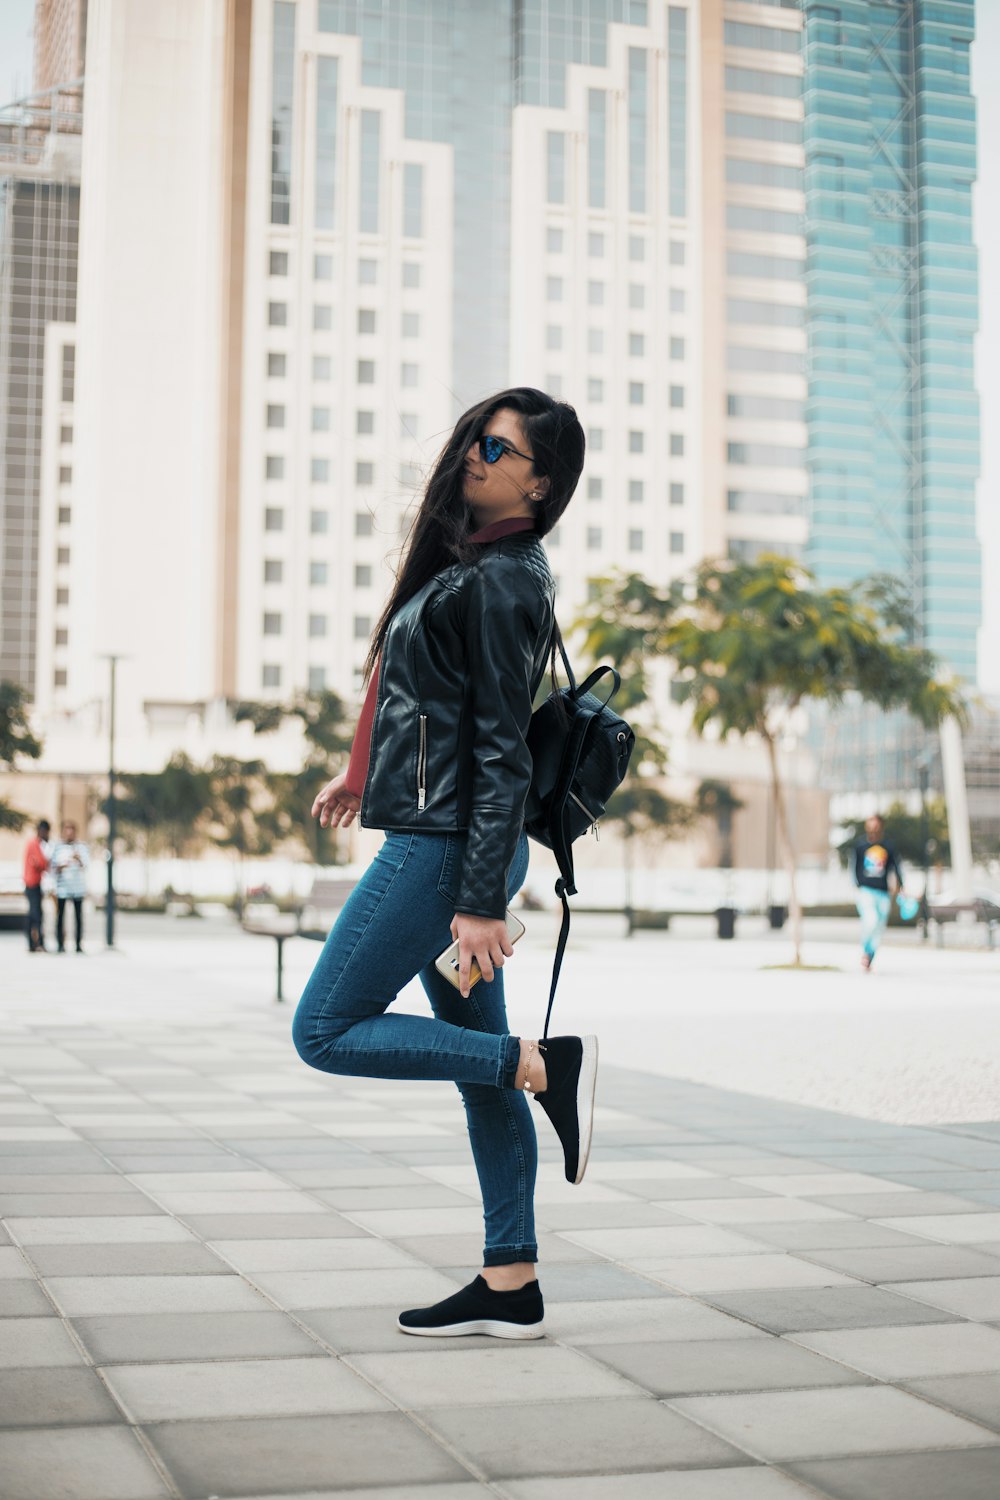 Woman in black jacket and blue denim jeans standing on sidewalk during  daytime photo – Free Jeans Image on Unsplash